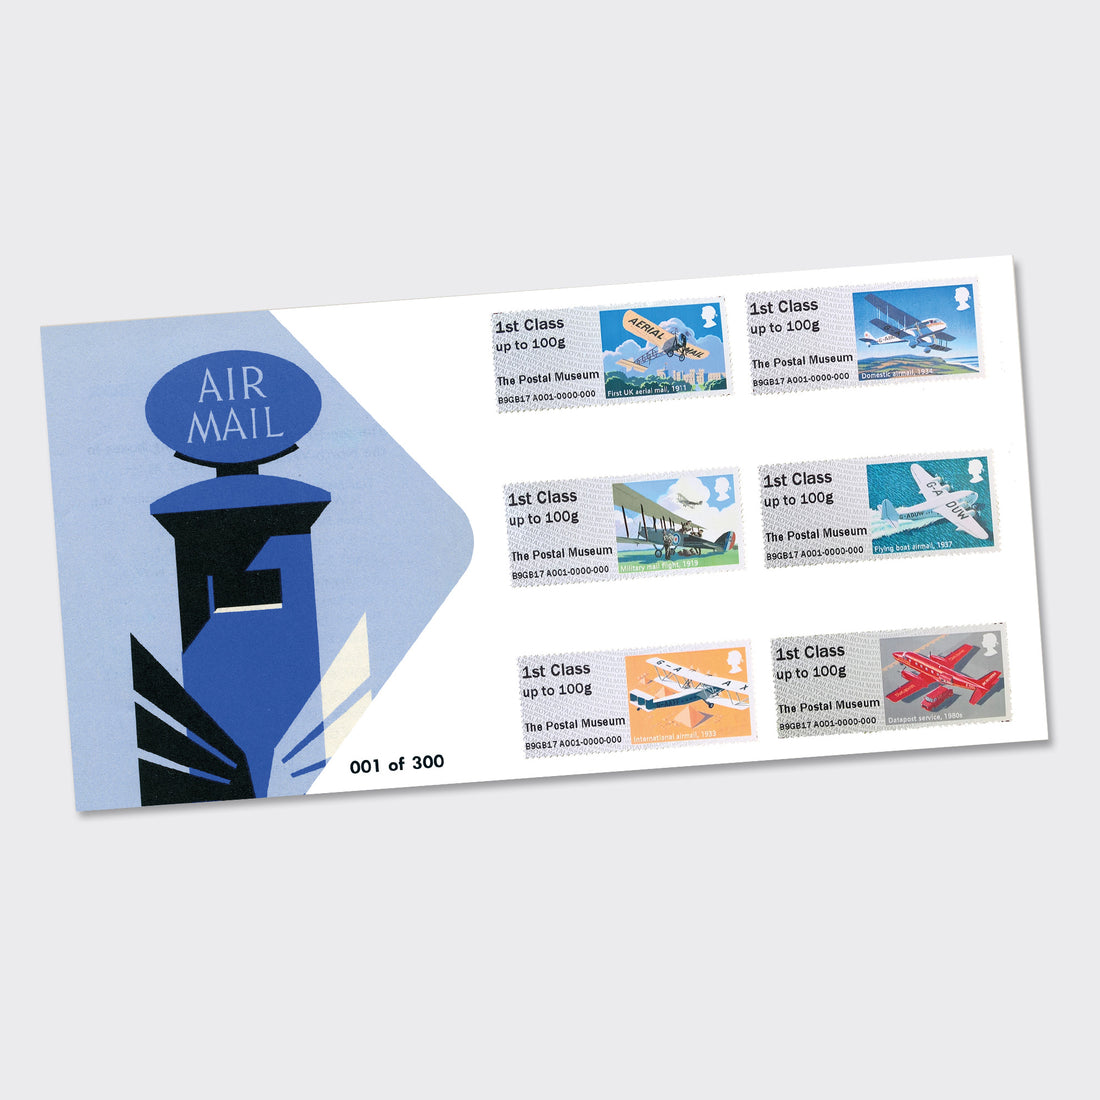 Mail by Air First Day Cover